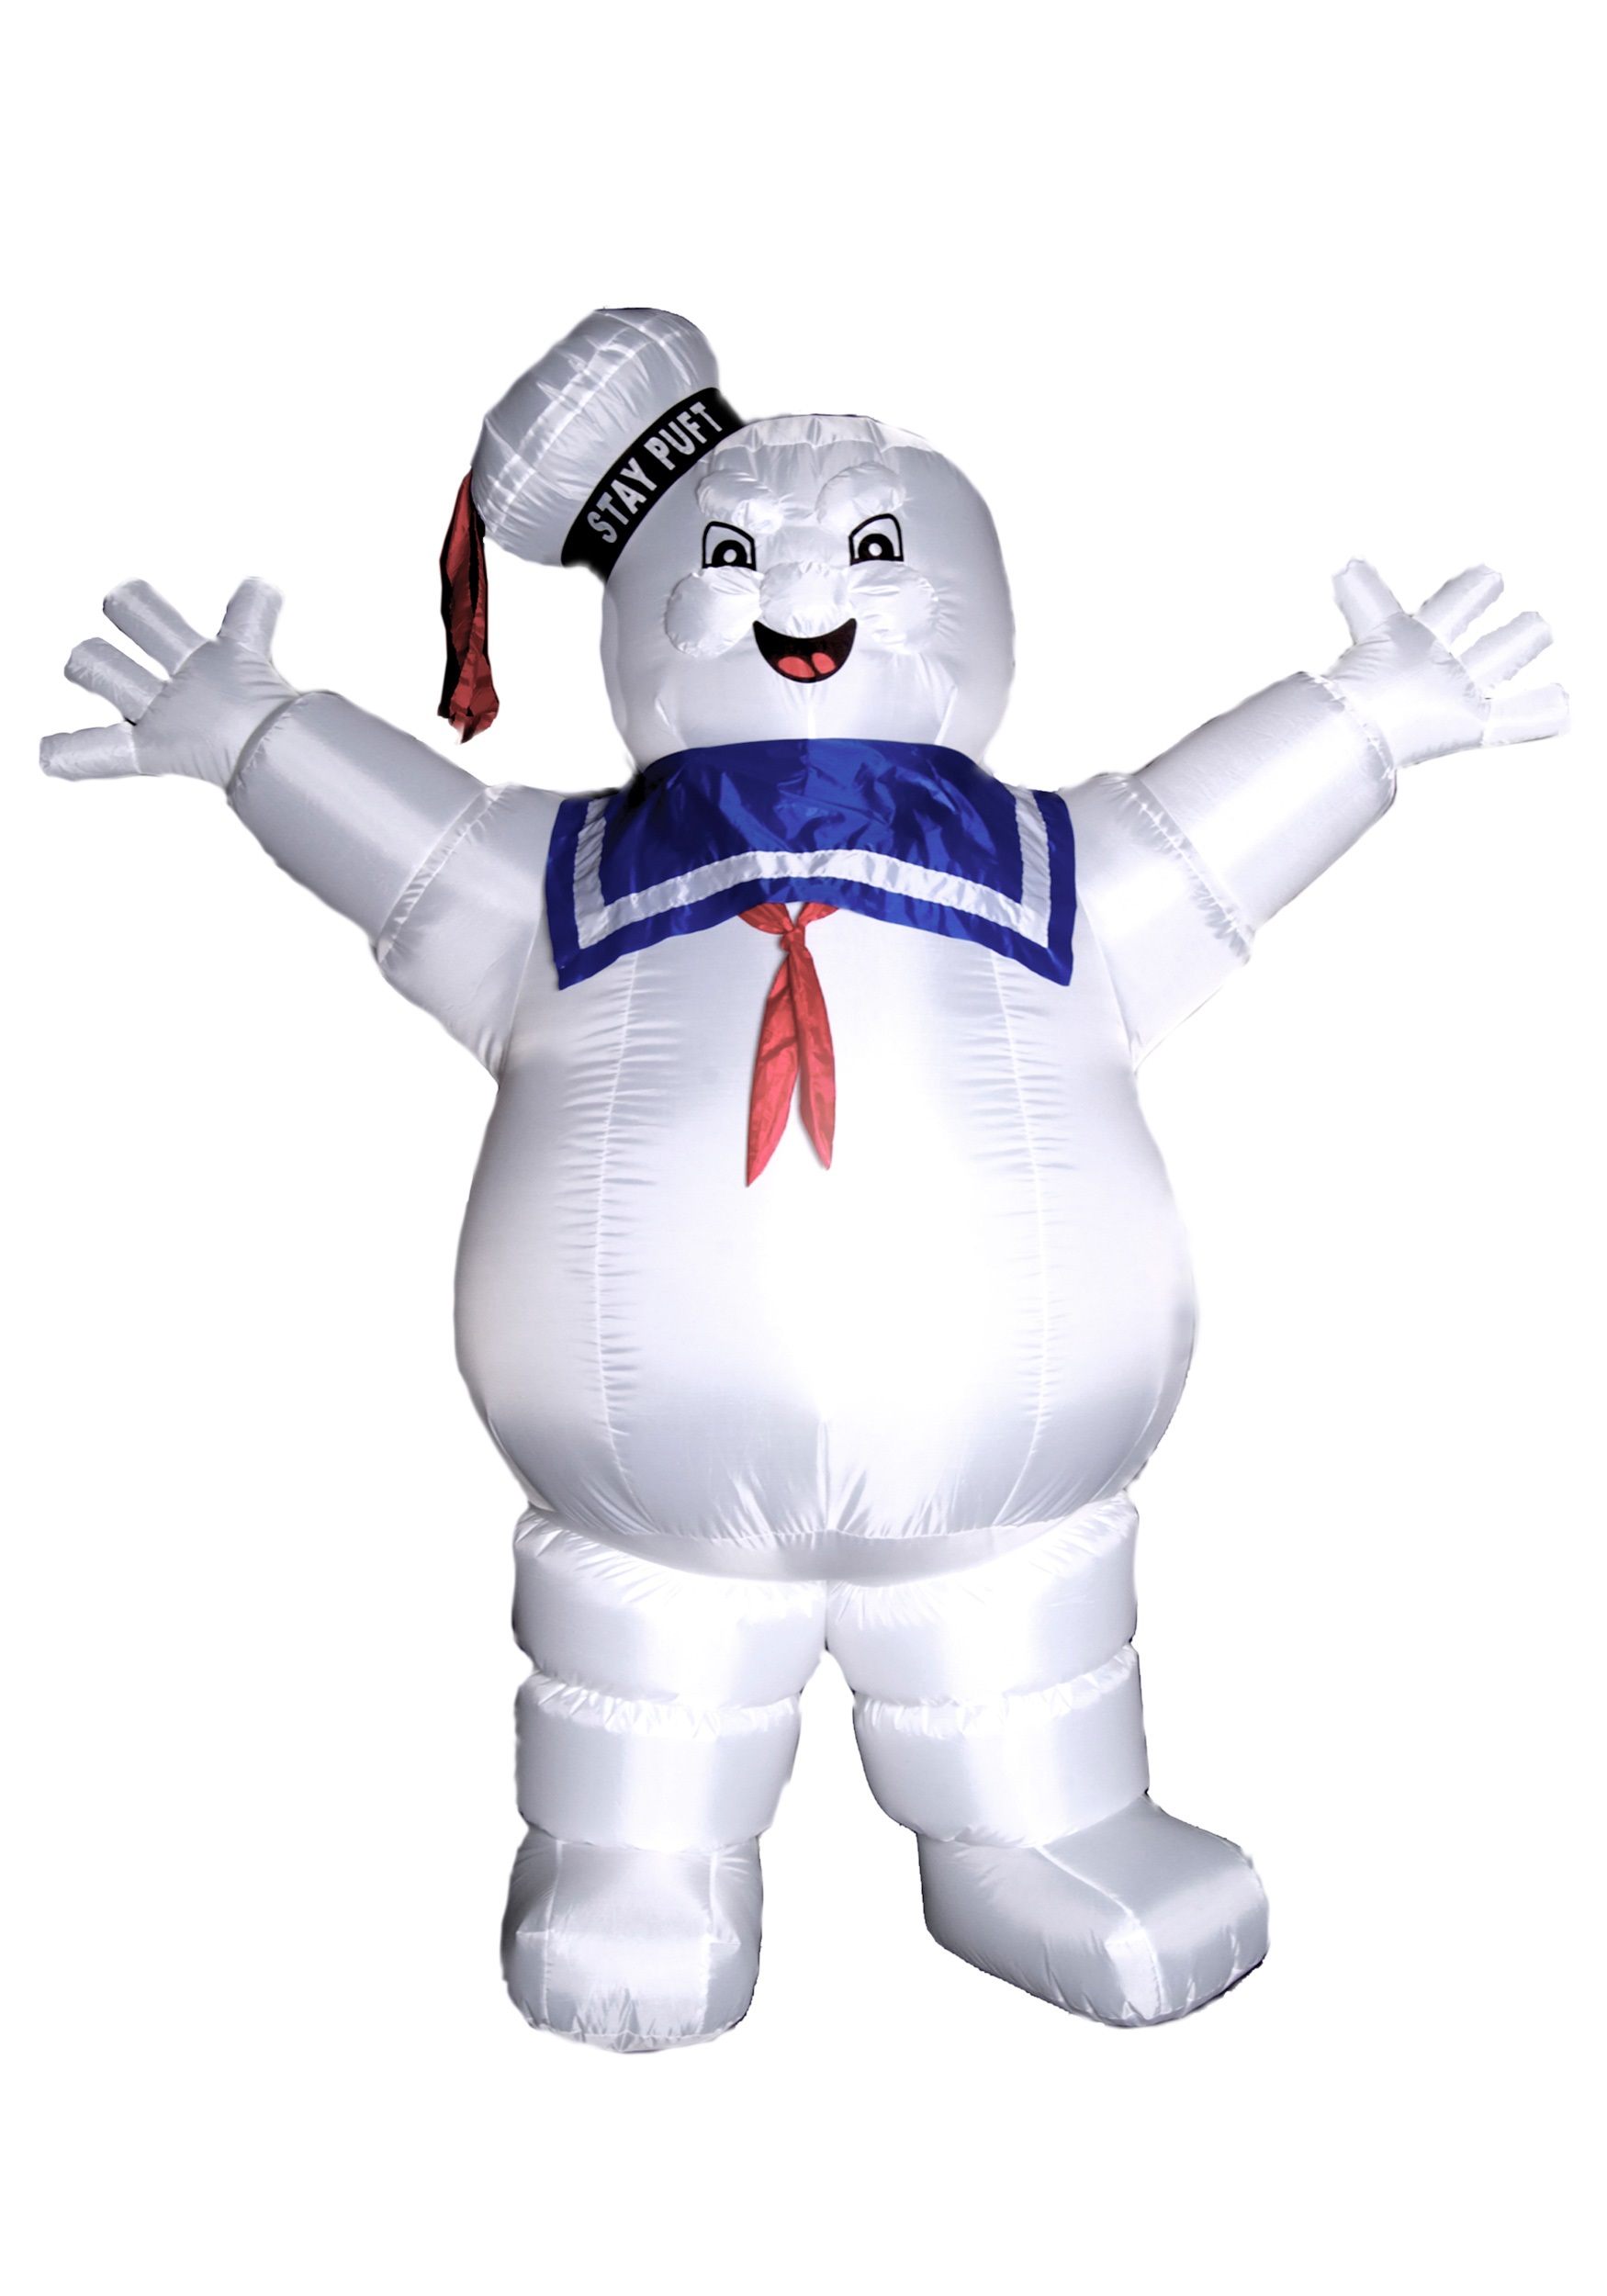 Stay Puft Marshmallow Man Ghostbusters Inflatable Halloween Prop